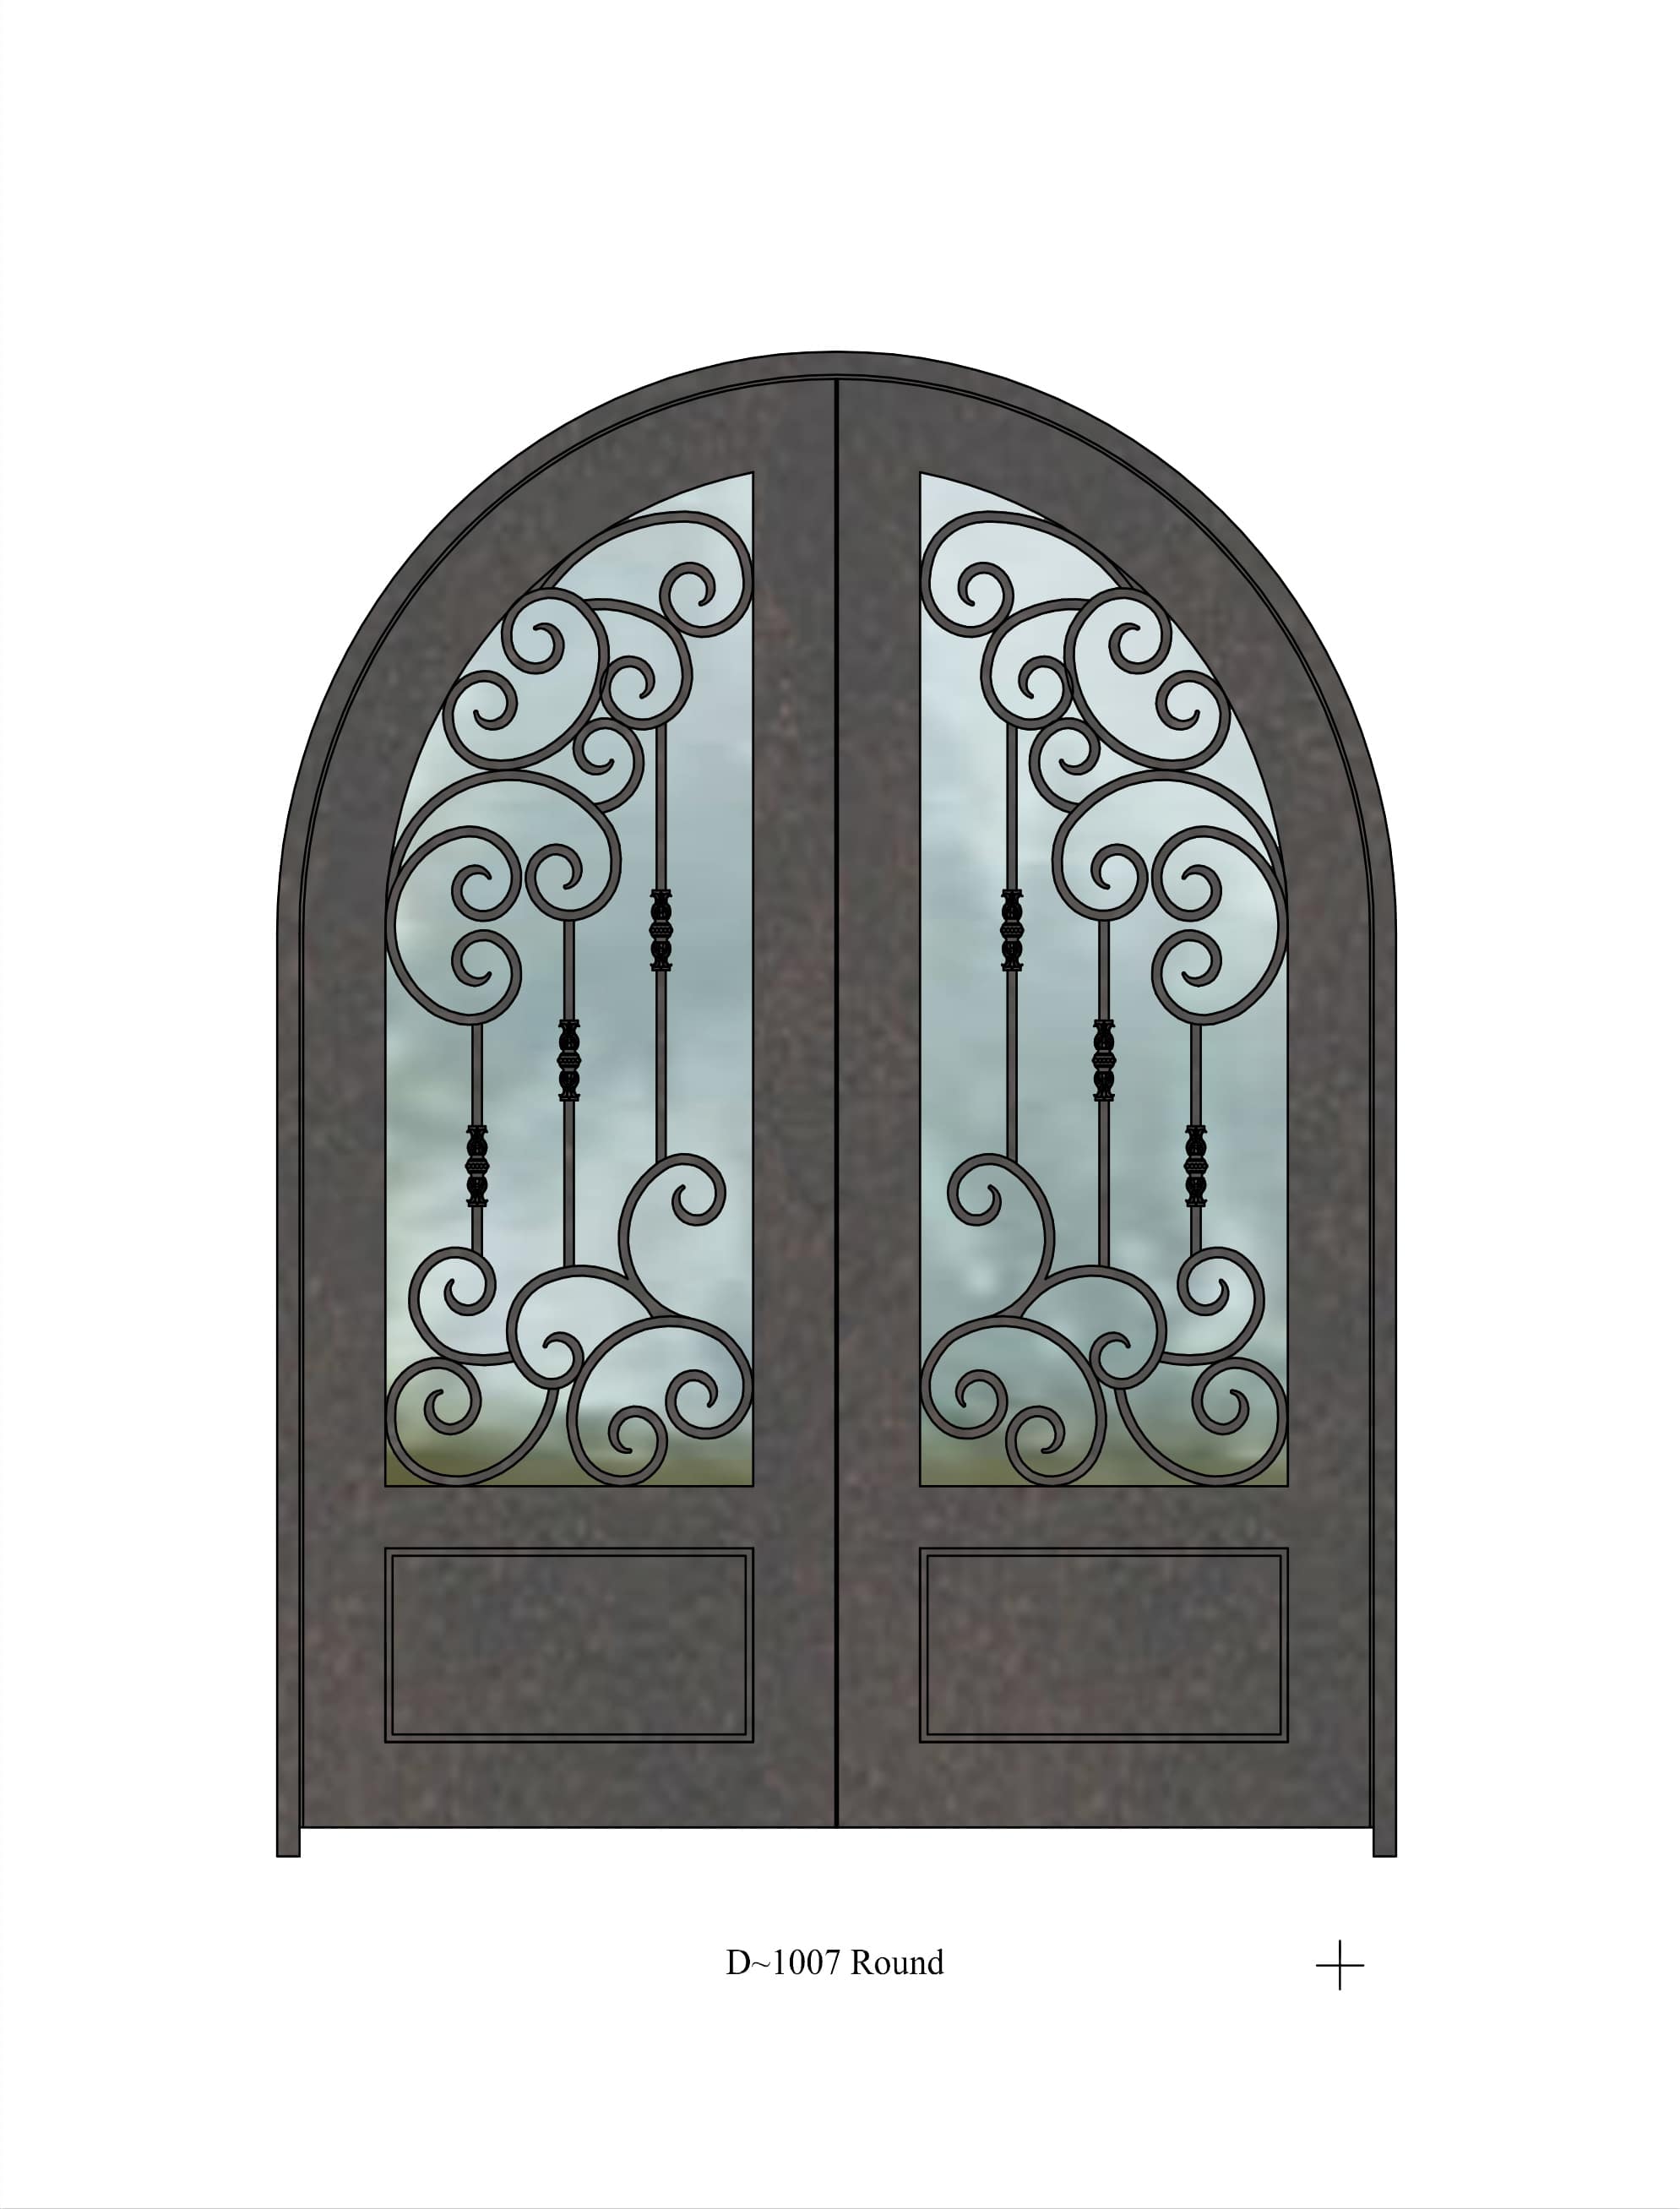 Round top iron door with large window and intricate pattern